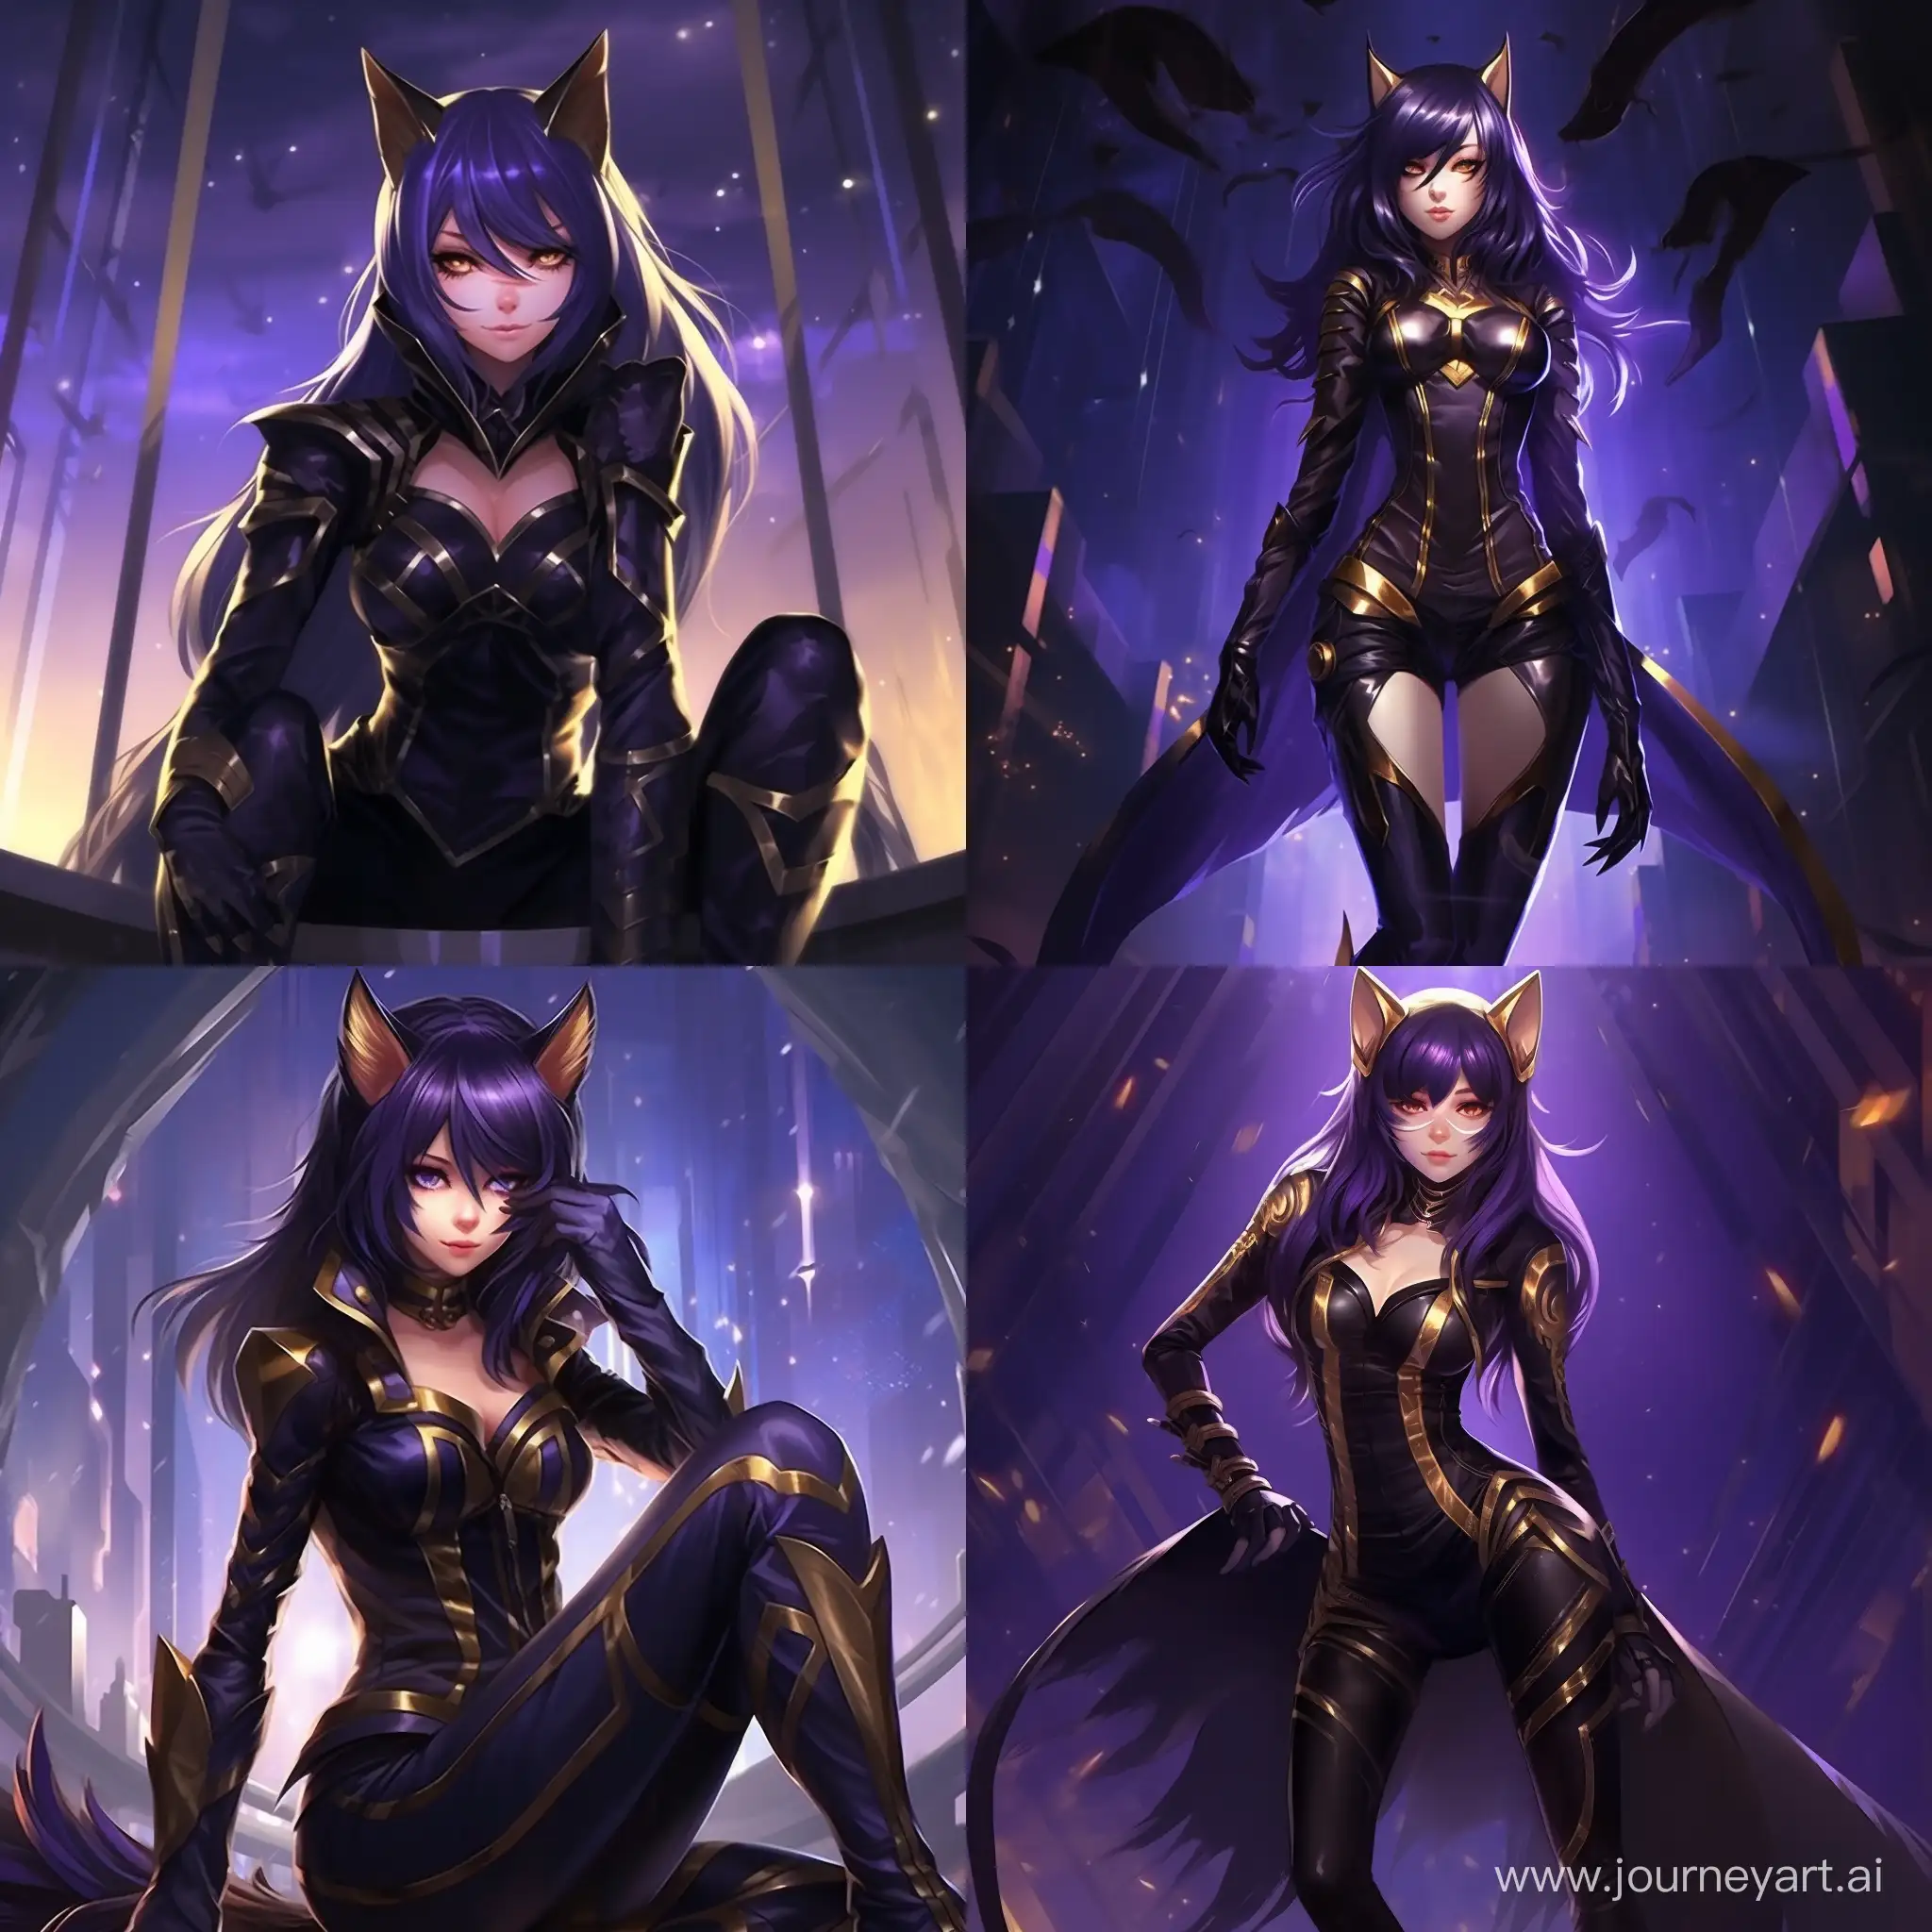 Anime woman with blue eyes, black hair, straight long hair, straight fringe, dark purple leather bodysuit high neck, black cat hood, black latex coat without sleeves, starry cosmo leggings, dark  boots with golden details and golden metallic tip, long black gloves